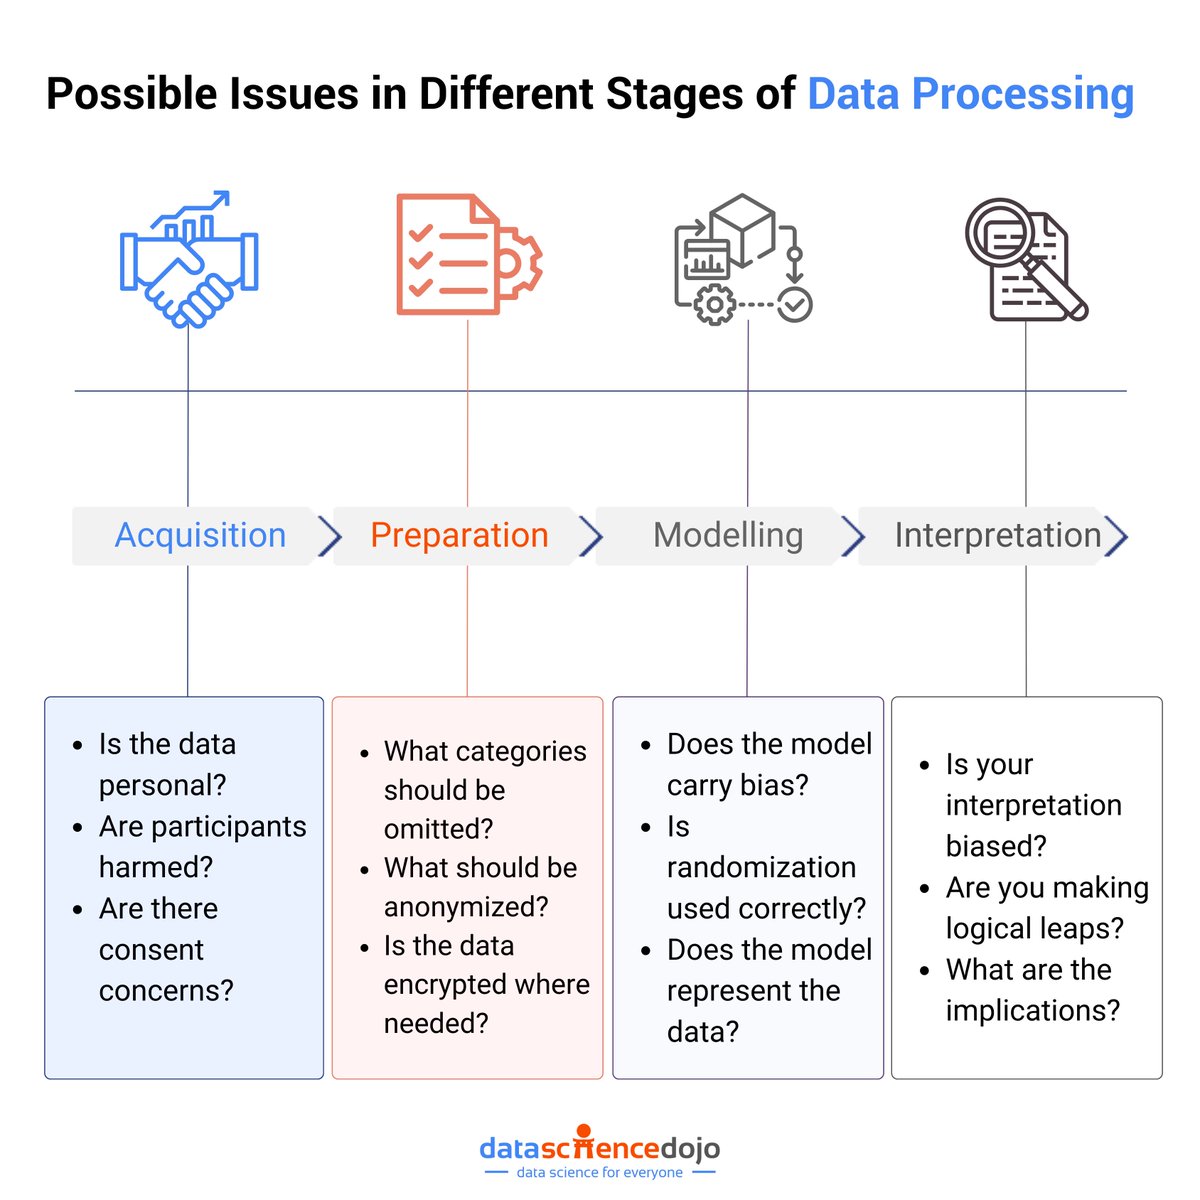 We all know data is valuable, but sometimes it needs a good scrub before it's sparkling clean! This post tackles the unexpected bumps you might hit while organizing your data. Learn more about Data preprocessing here ▶️ hubs.la/Q02xsyWd0 #Dataprocessing #datascience